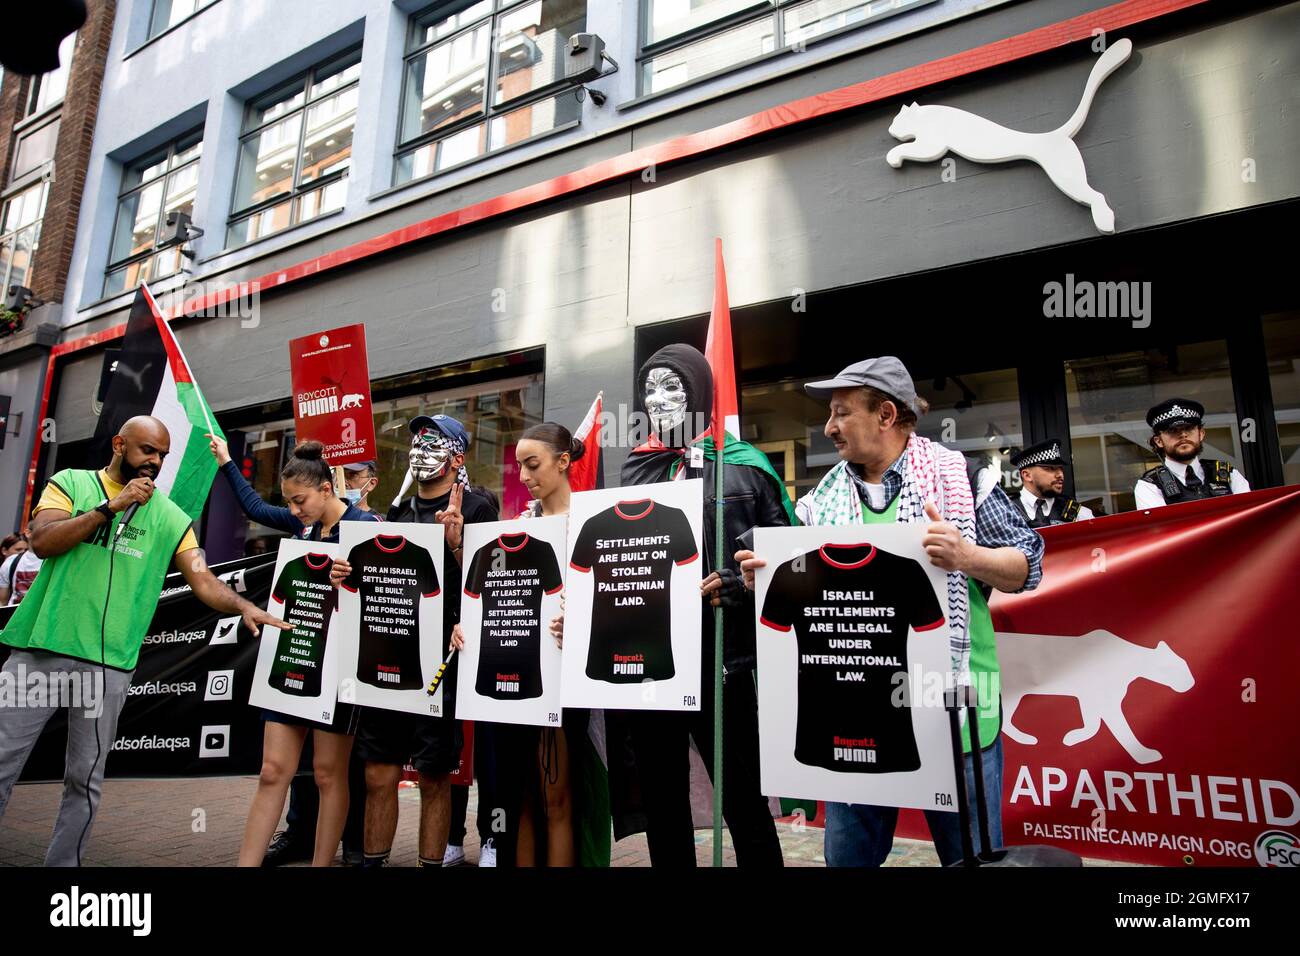 Palestinian supporters holding placards expressing their opinion, outside  the Puma flagship store at Carnaby Street during the demonstration.A global  boycott campaign called by Palestinian supporters against Puma in review of  their sponsorship